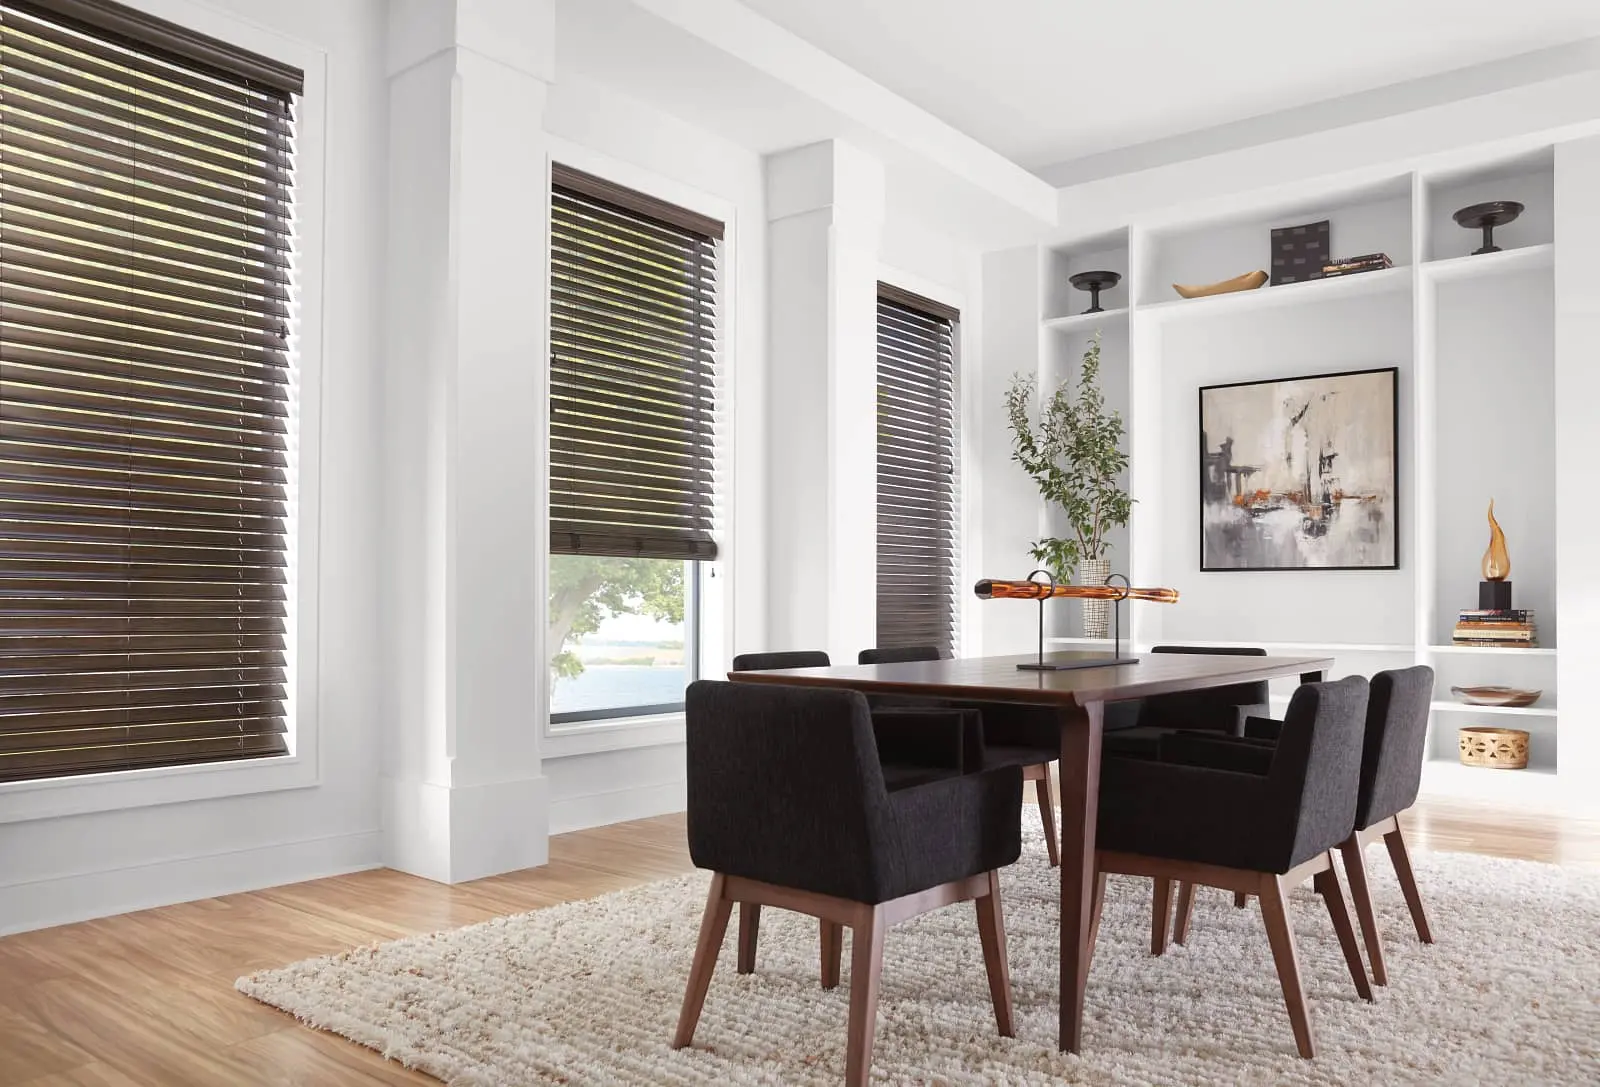 Everwood Blinds in a dining room